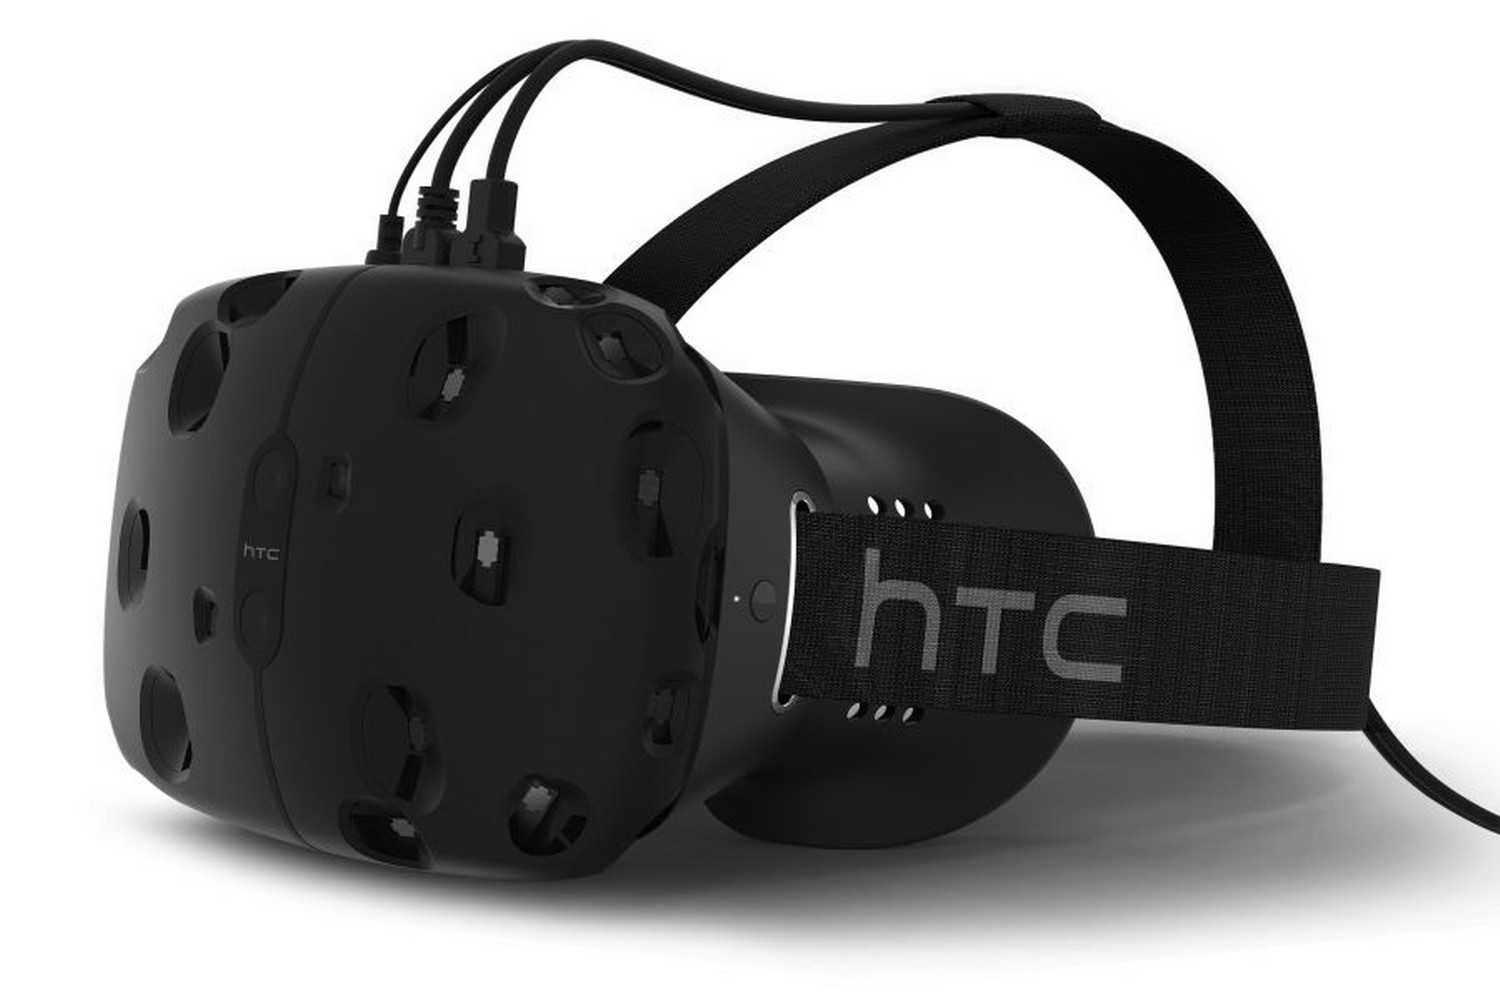 VALVE’S VIVE VR WILL BE PRICEY, SAYS HTC EXEC